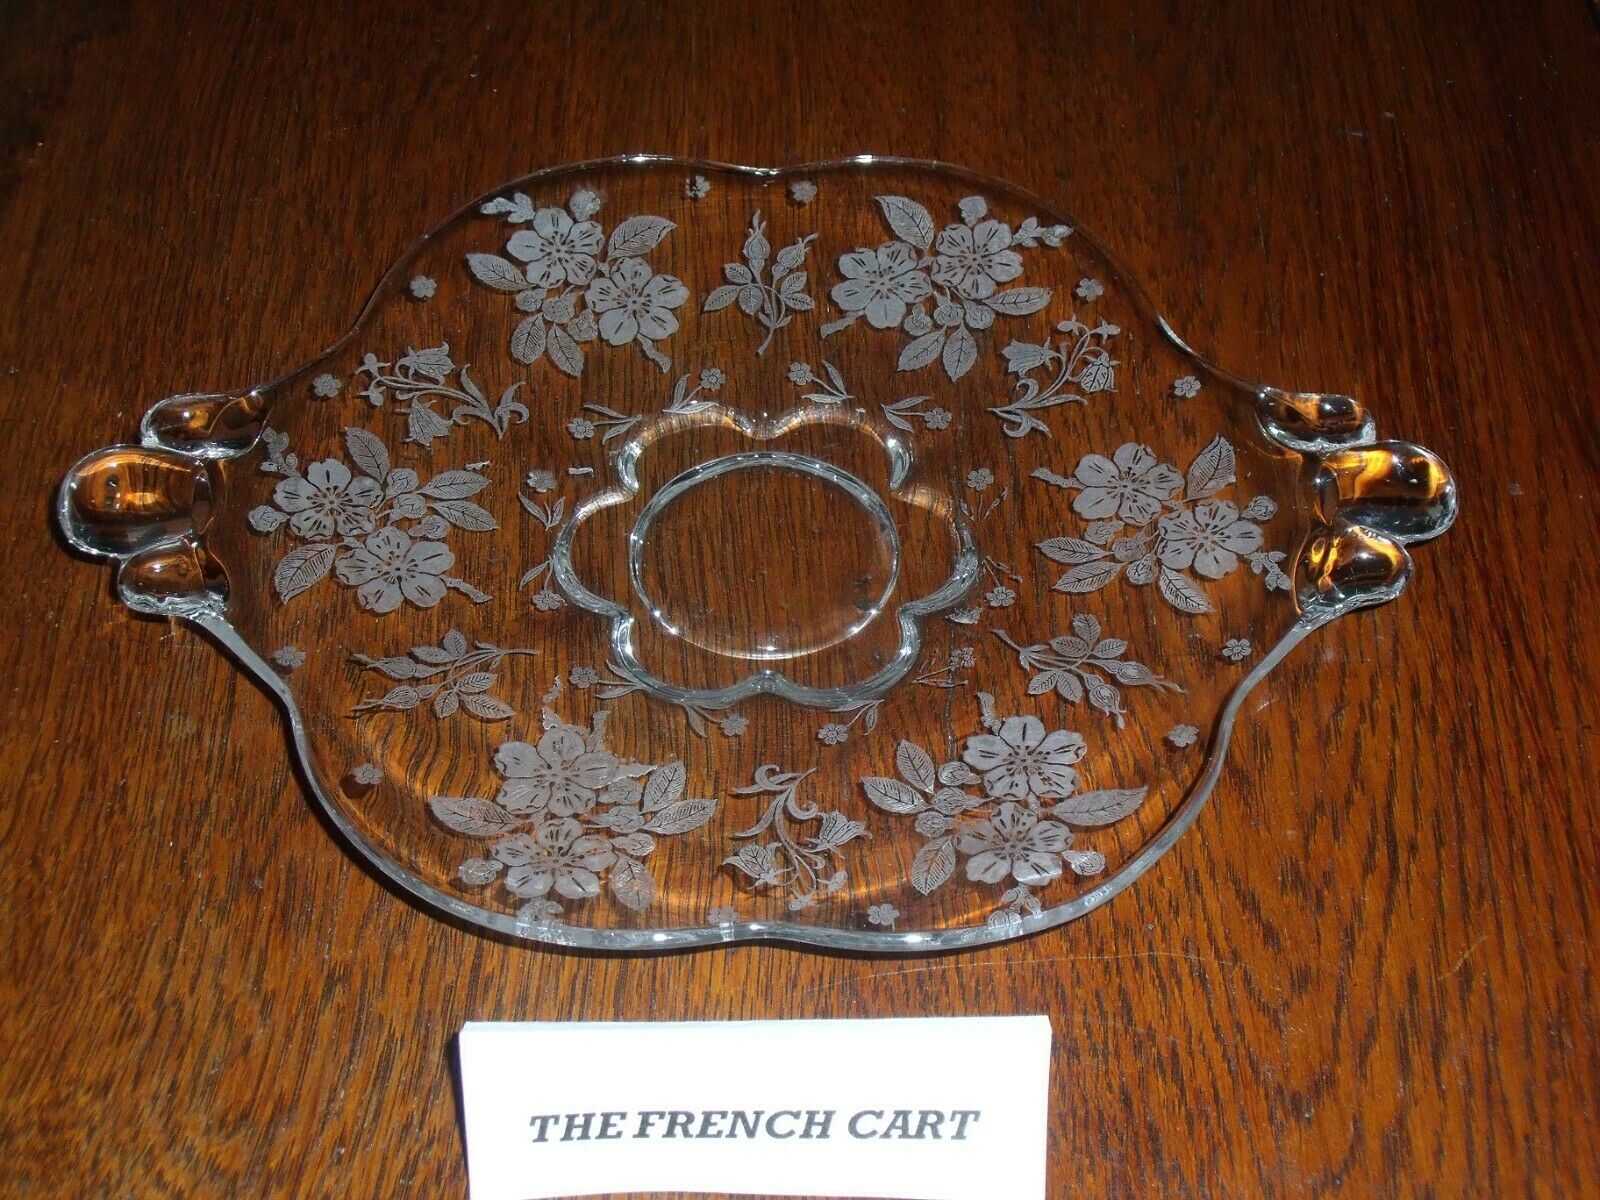 Duncan & Miller Two-handle  Plate "language Of Flowers" Etched Plate